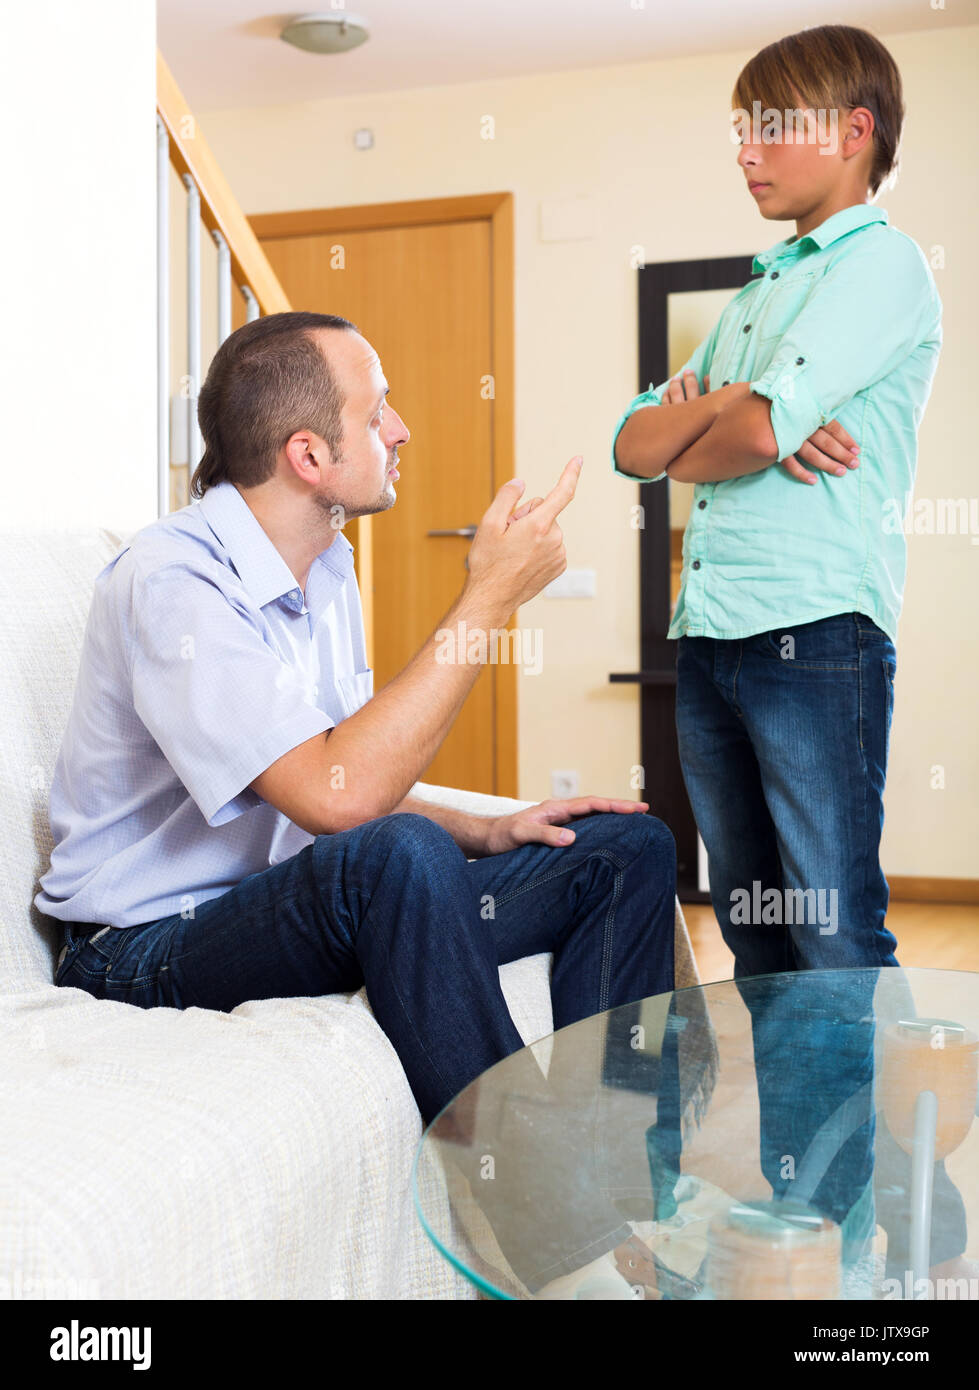 Riley father and teenage son discussing something interesting indoors. Focus on the man Stock Photo